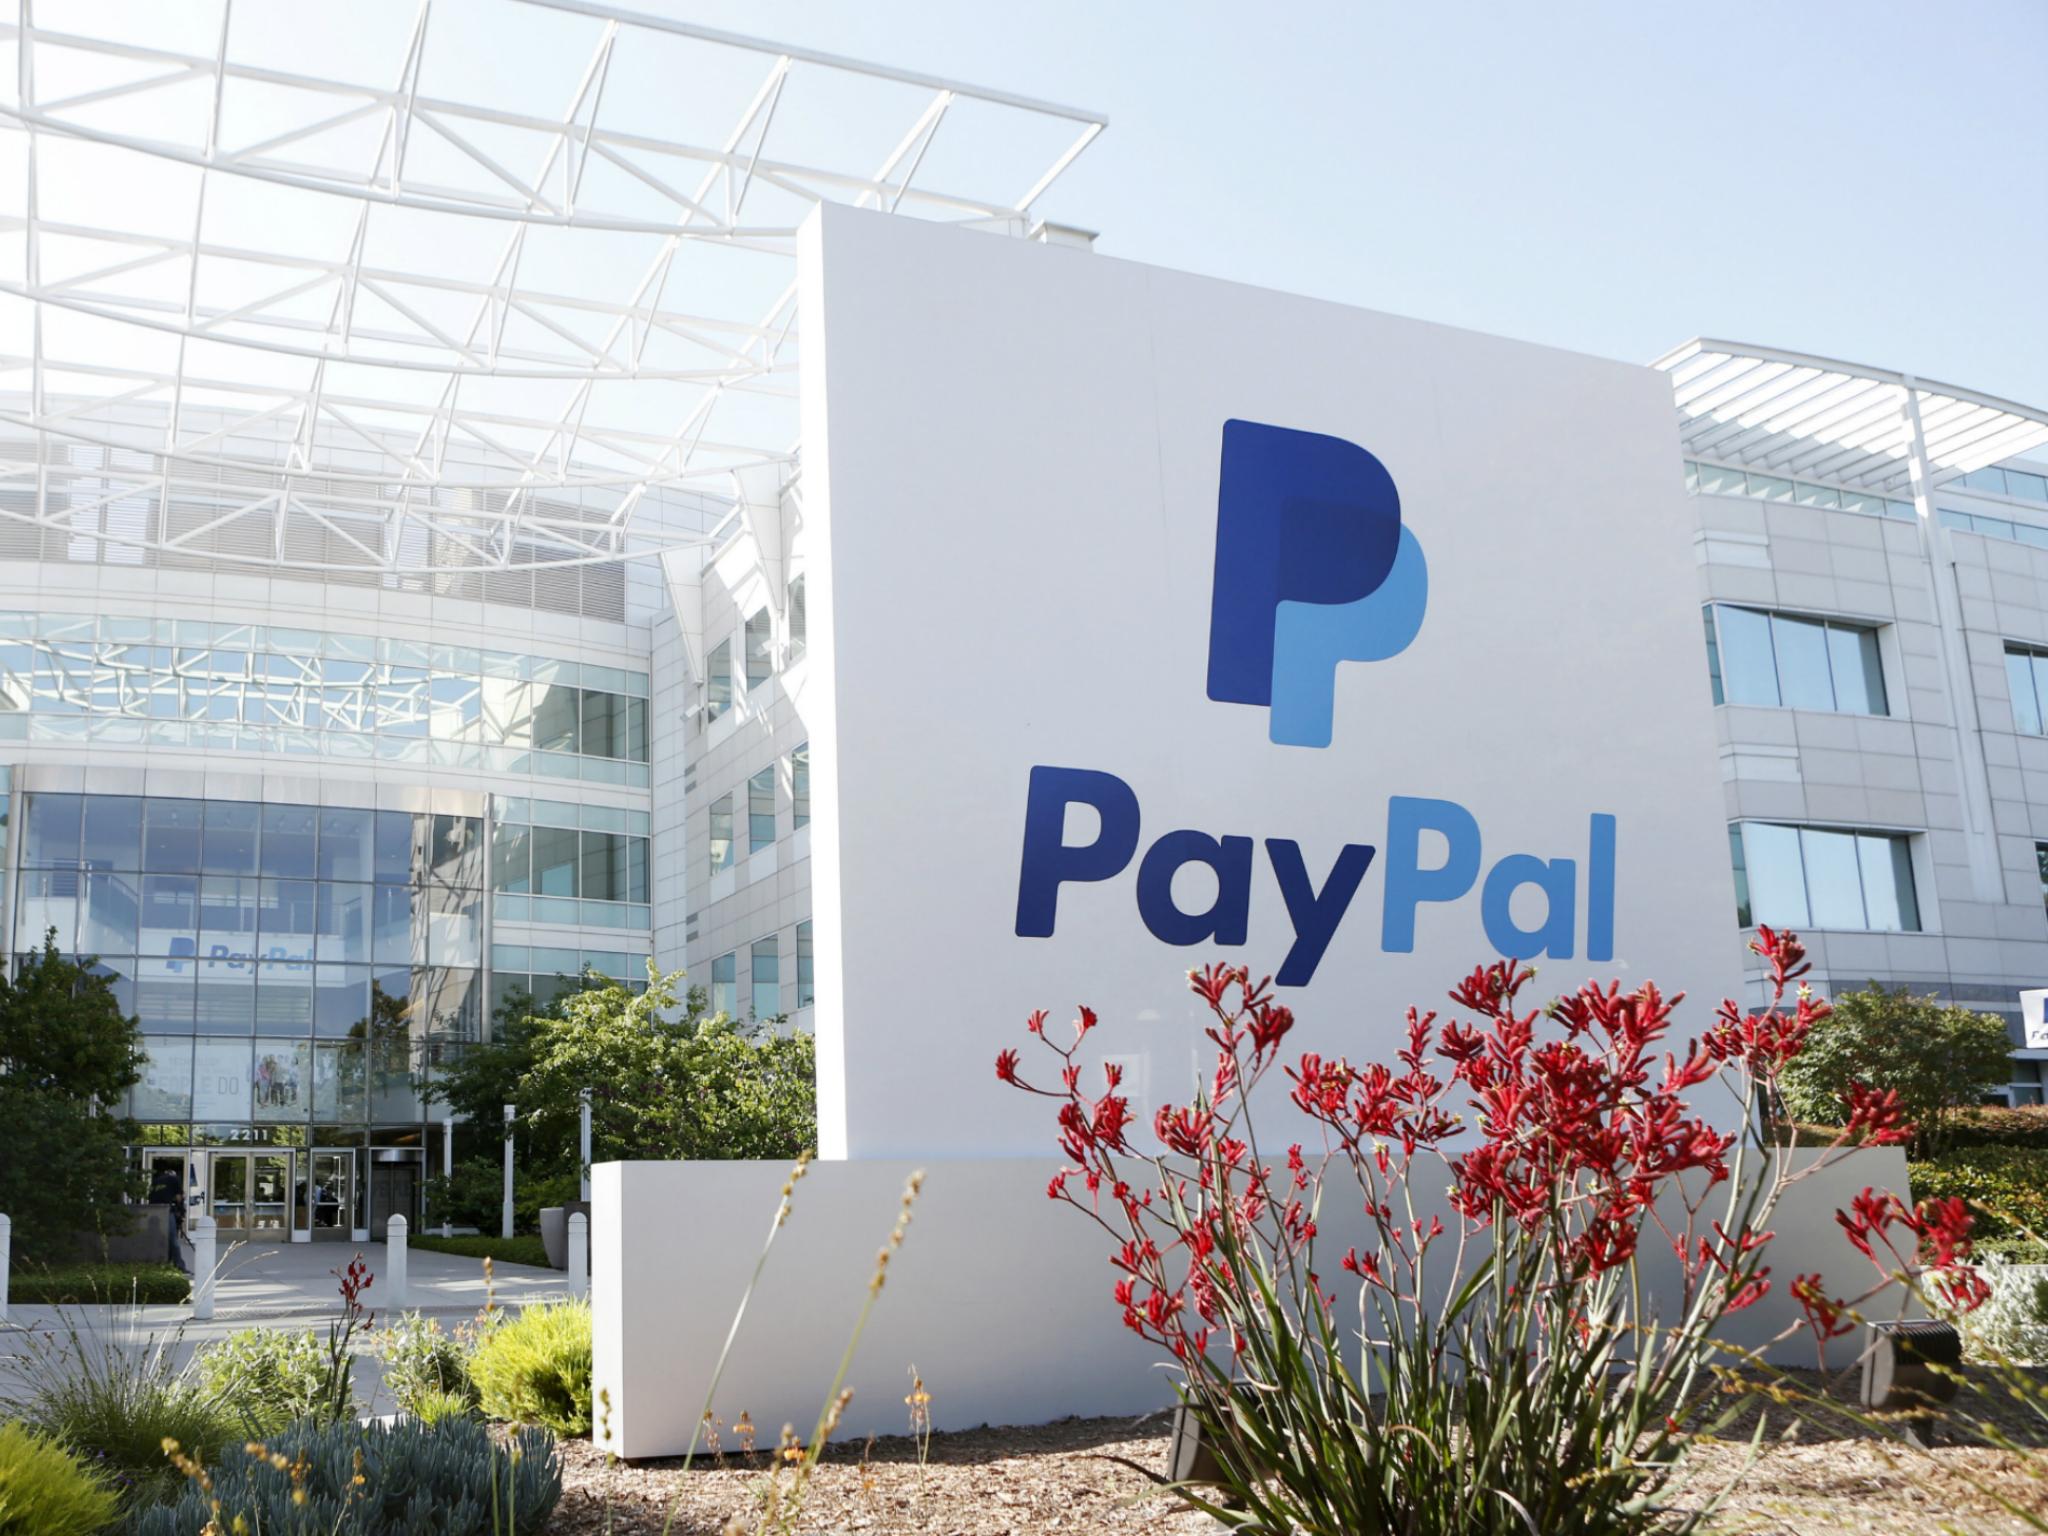 PayPal's changes will come into force next month